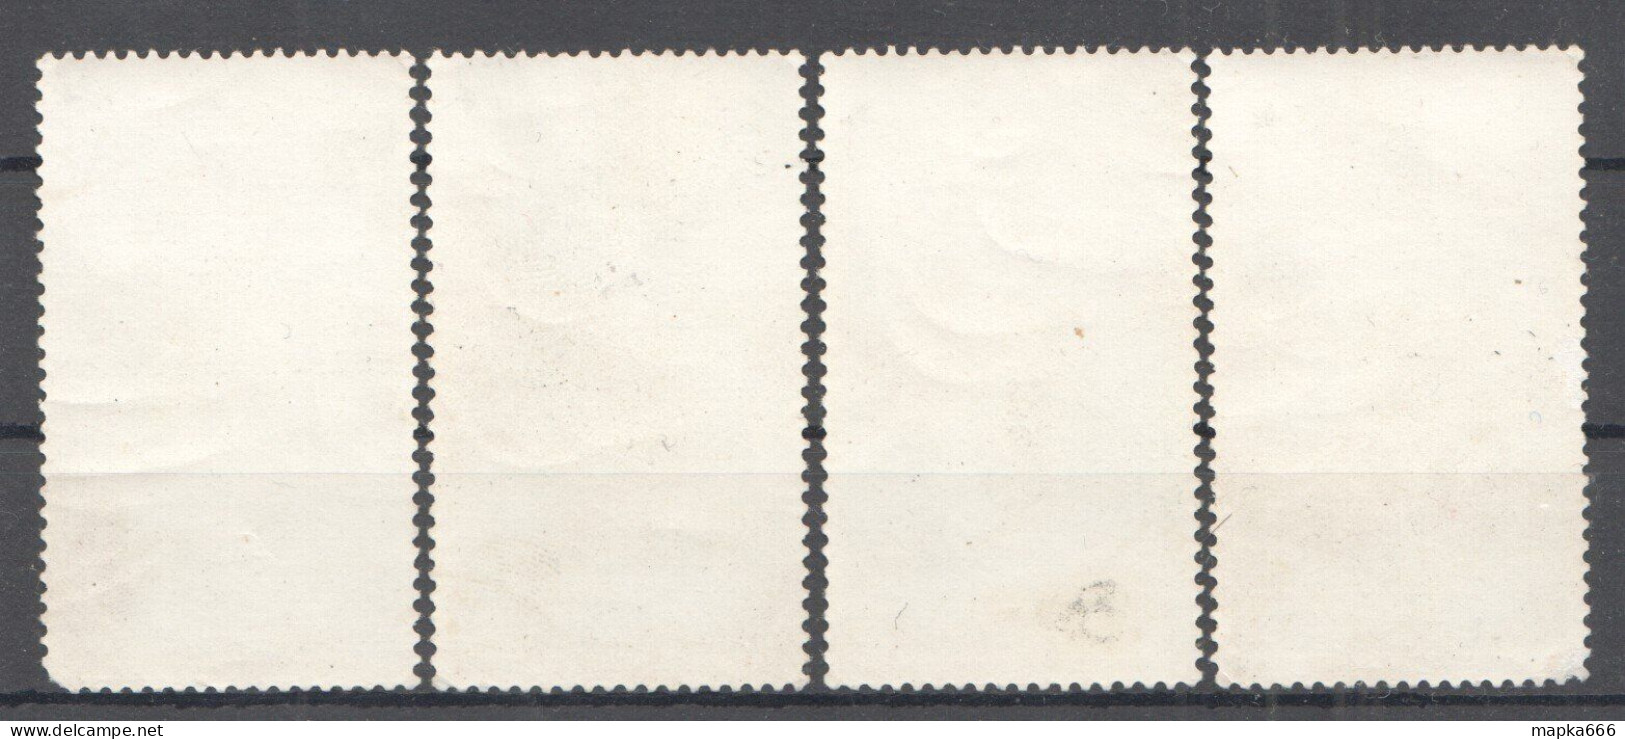 A0580 1964 China Hydroelectirc Power Station !!! #834-7 Michel 60 Euro Used - Other & Unclassified